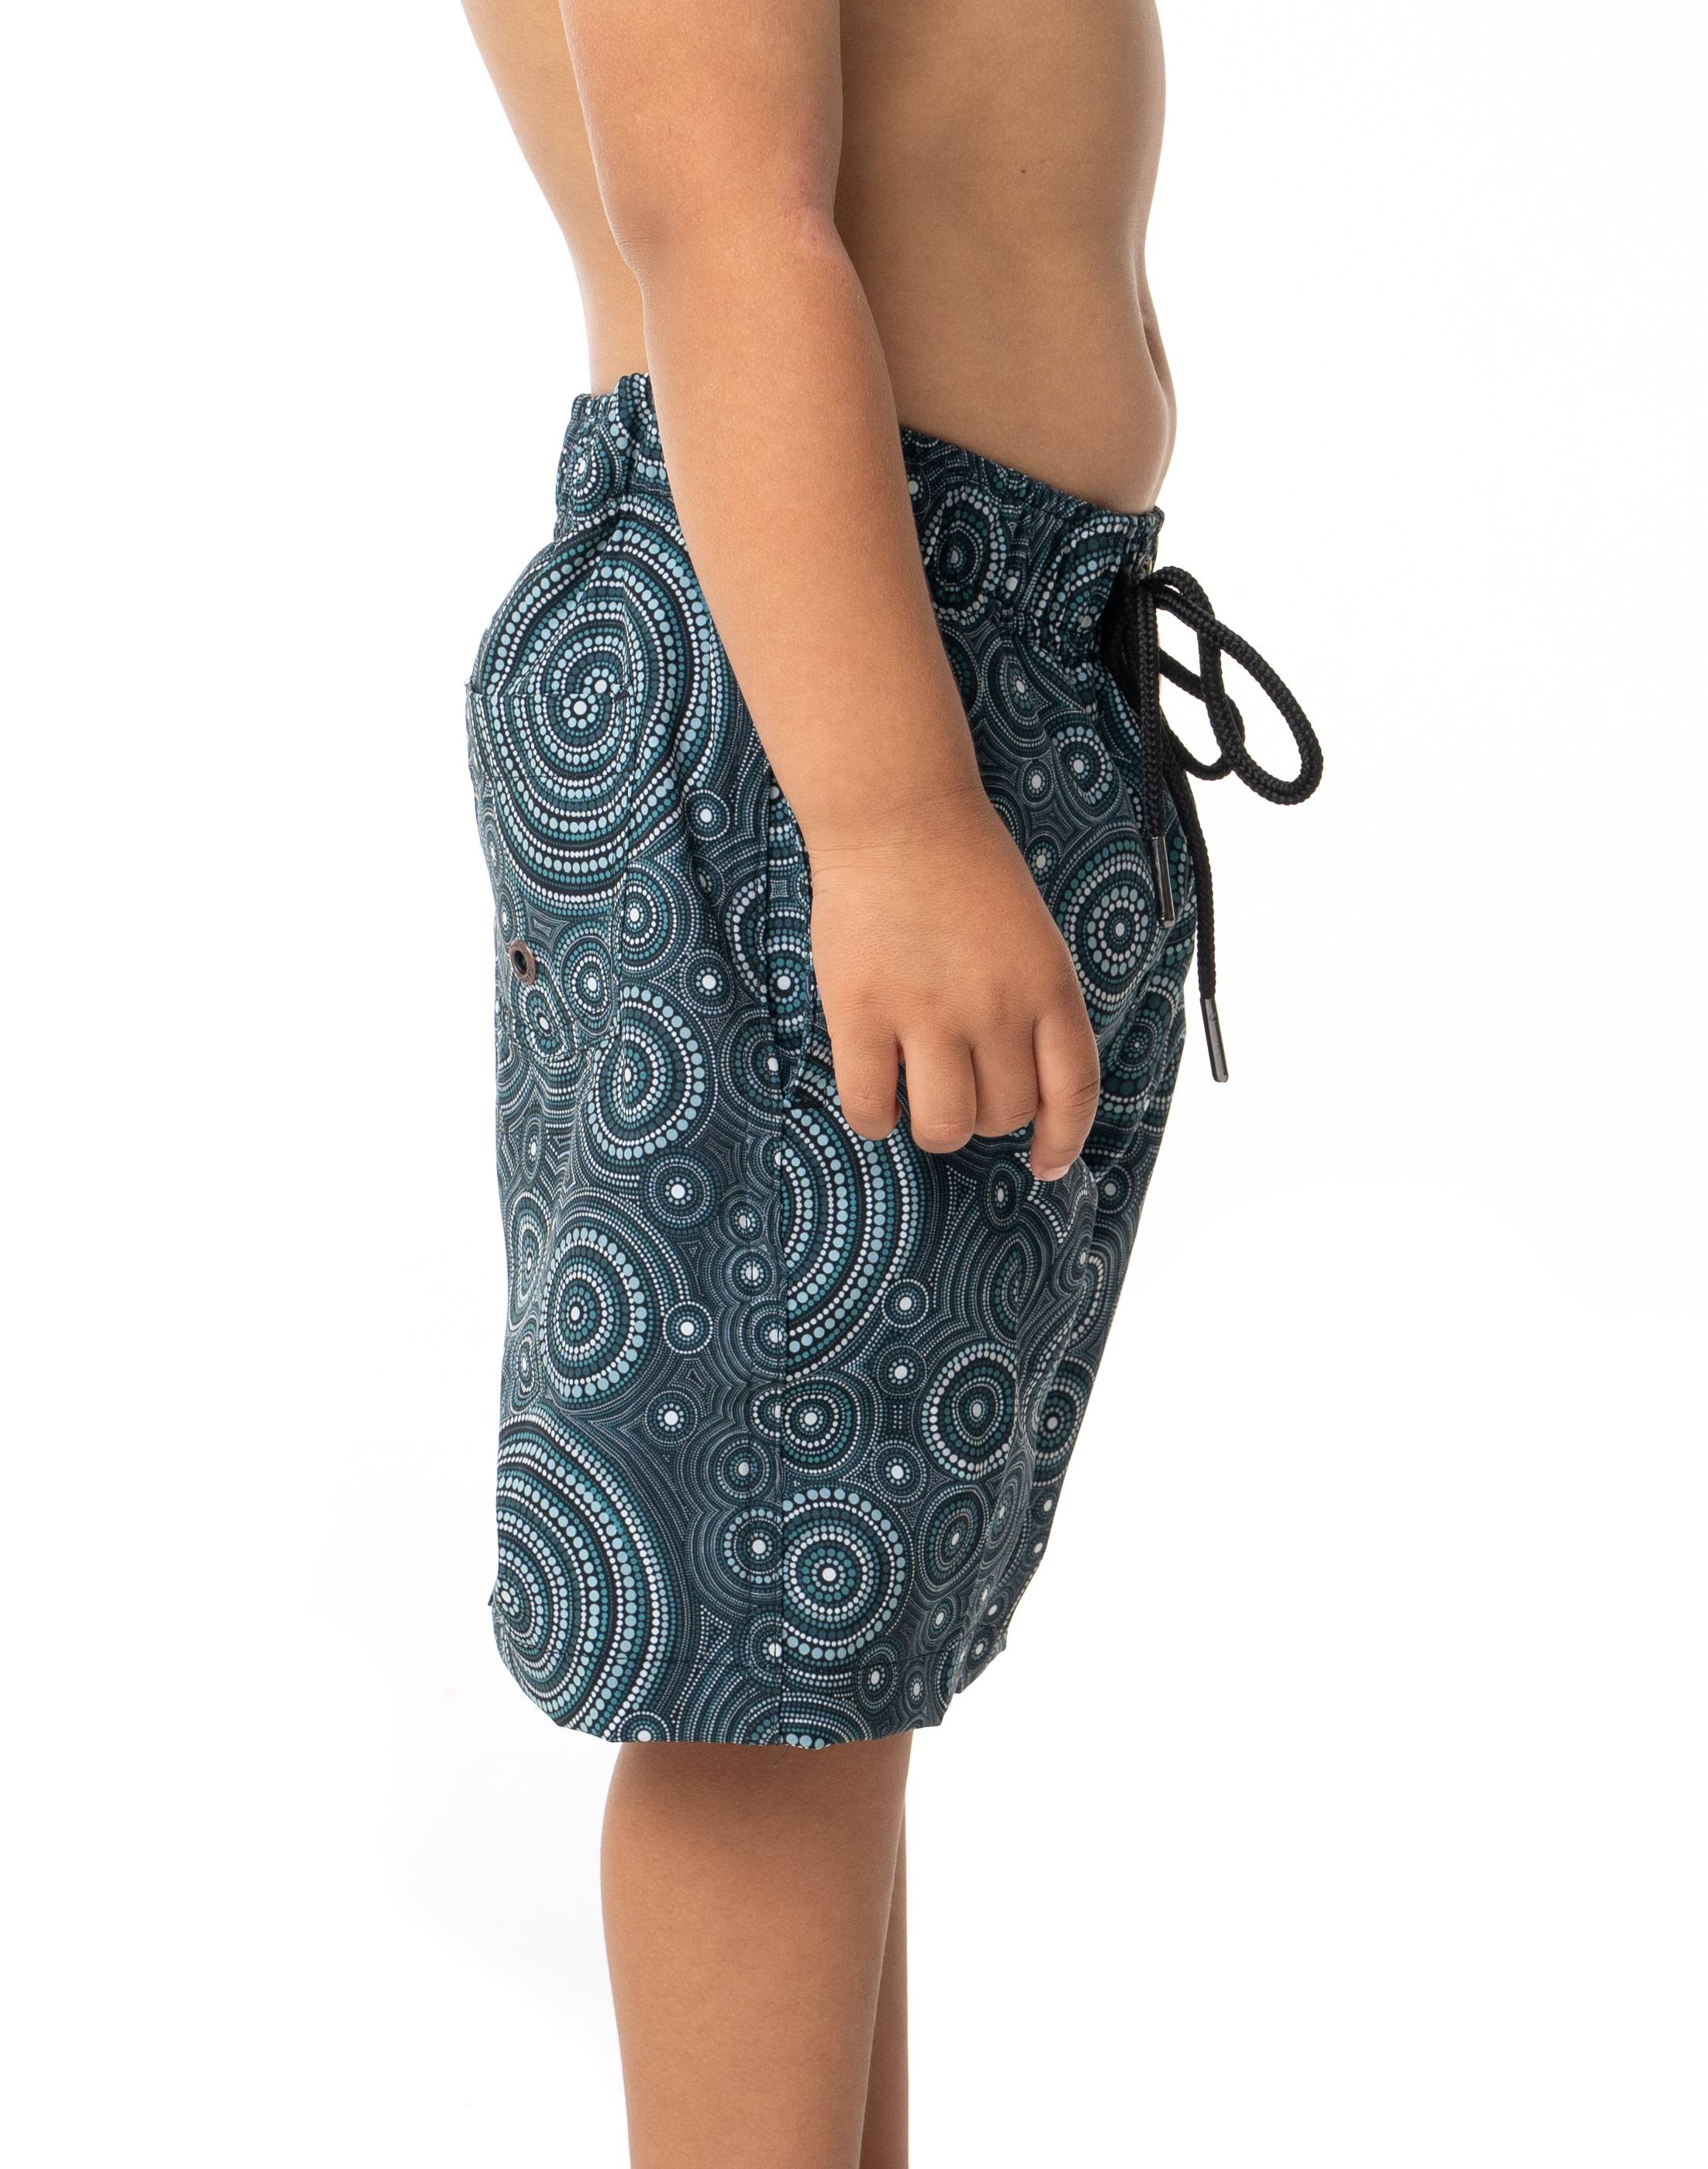 SevenC's Kids' Recycled Polyester Shorts in Dreaming Print - Side View